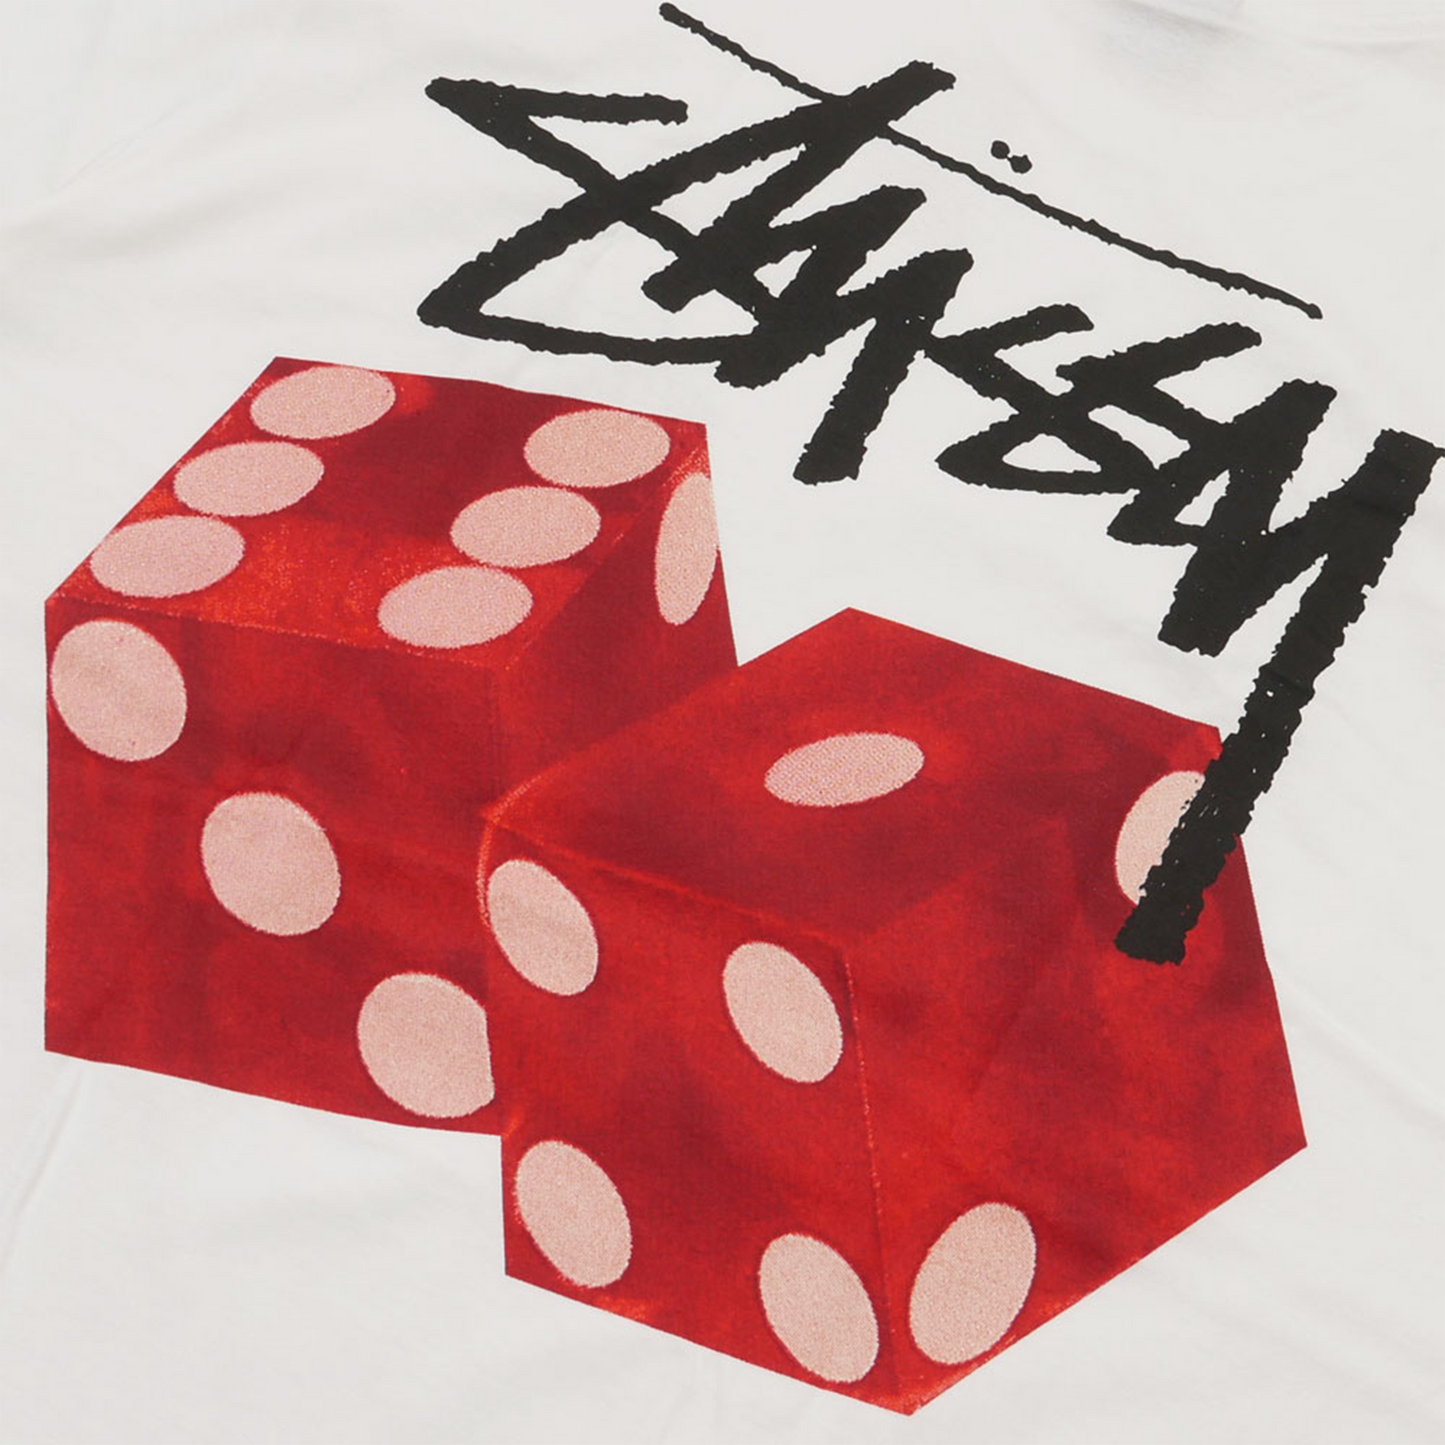 Stüssy Diced Out Tee White